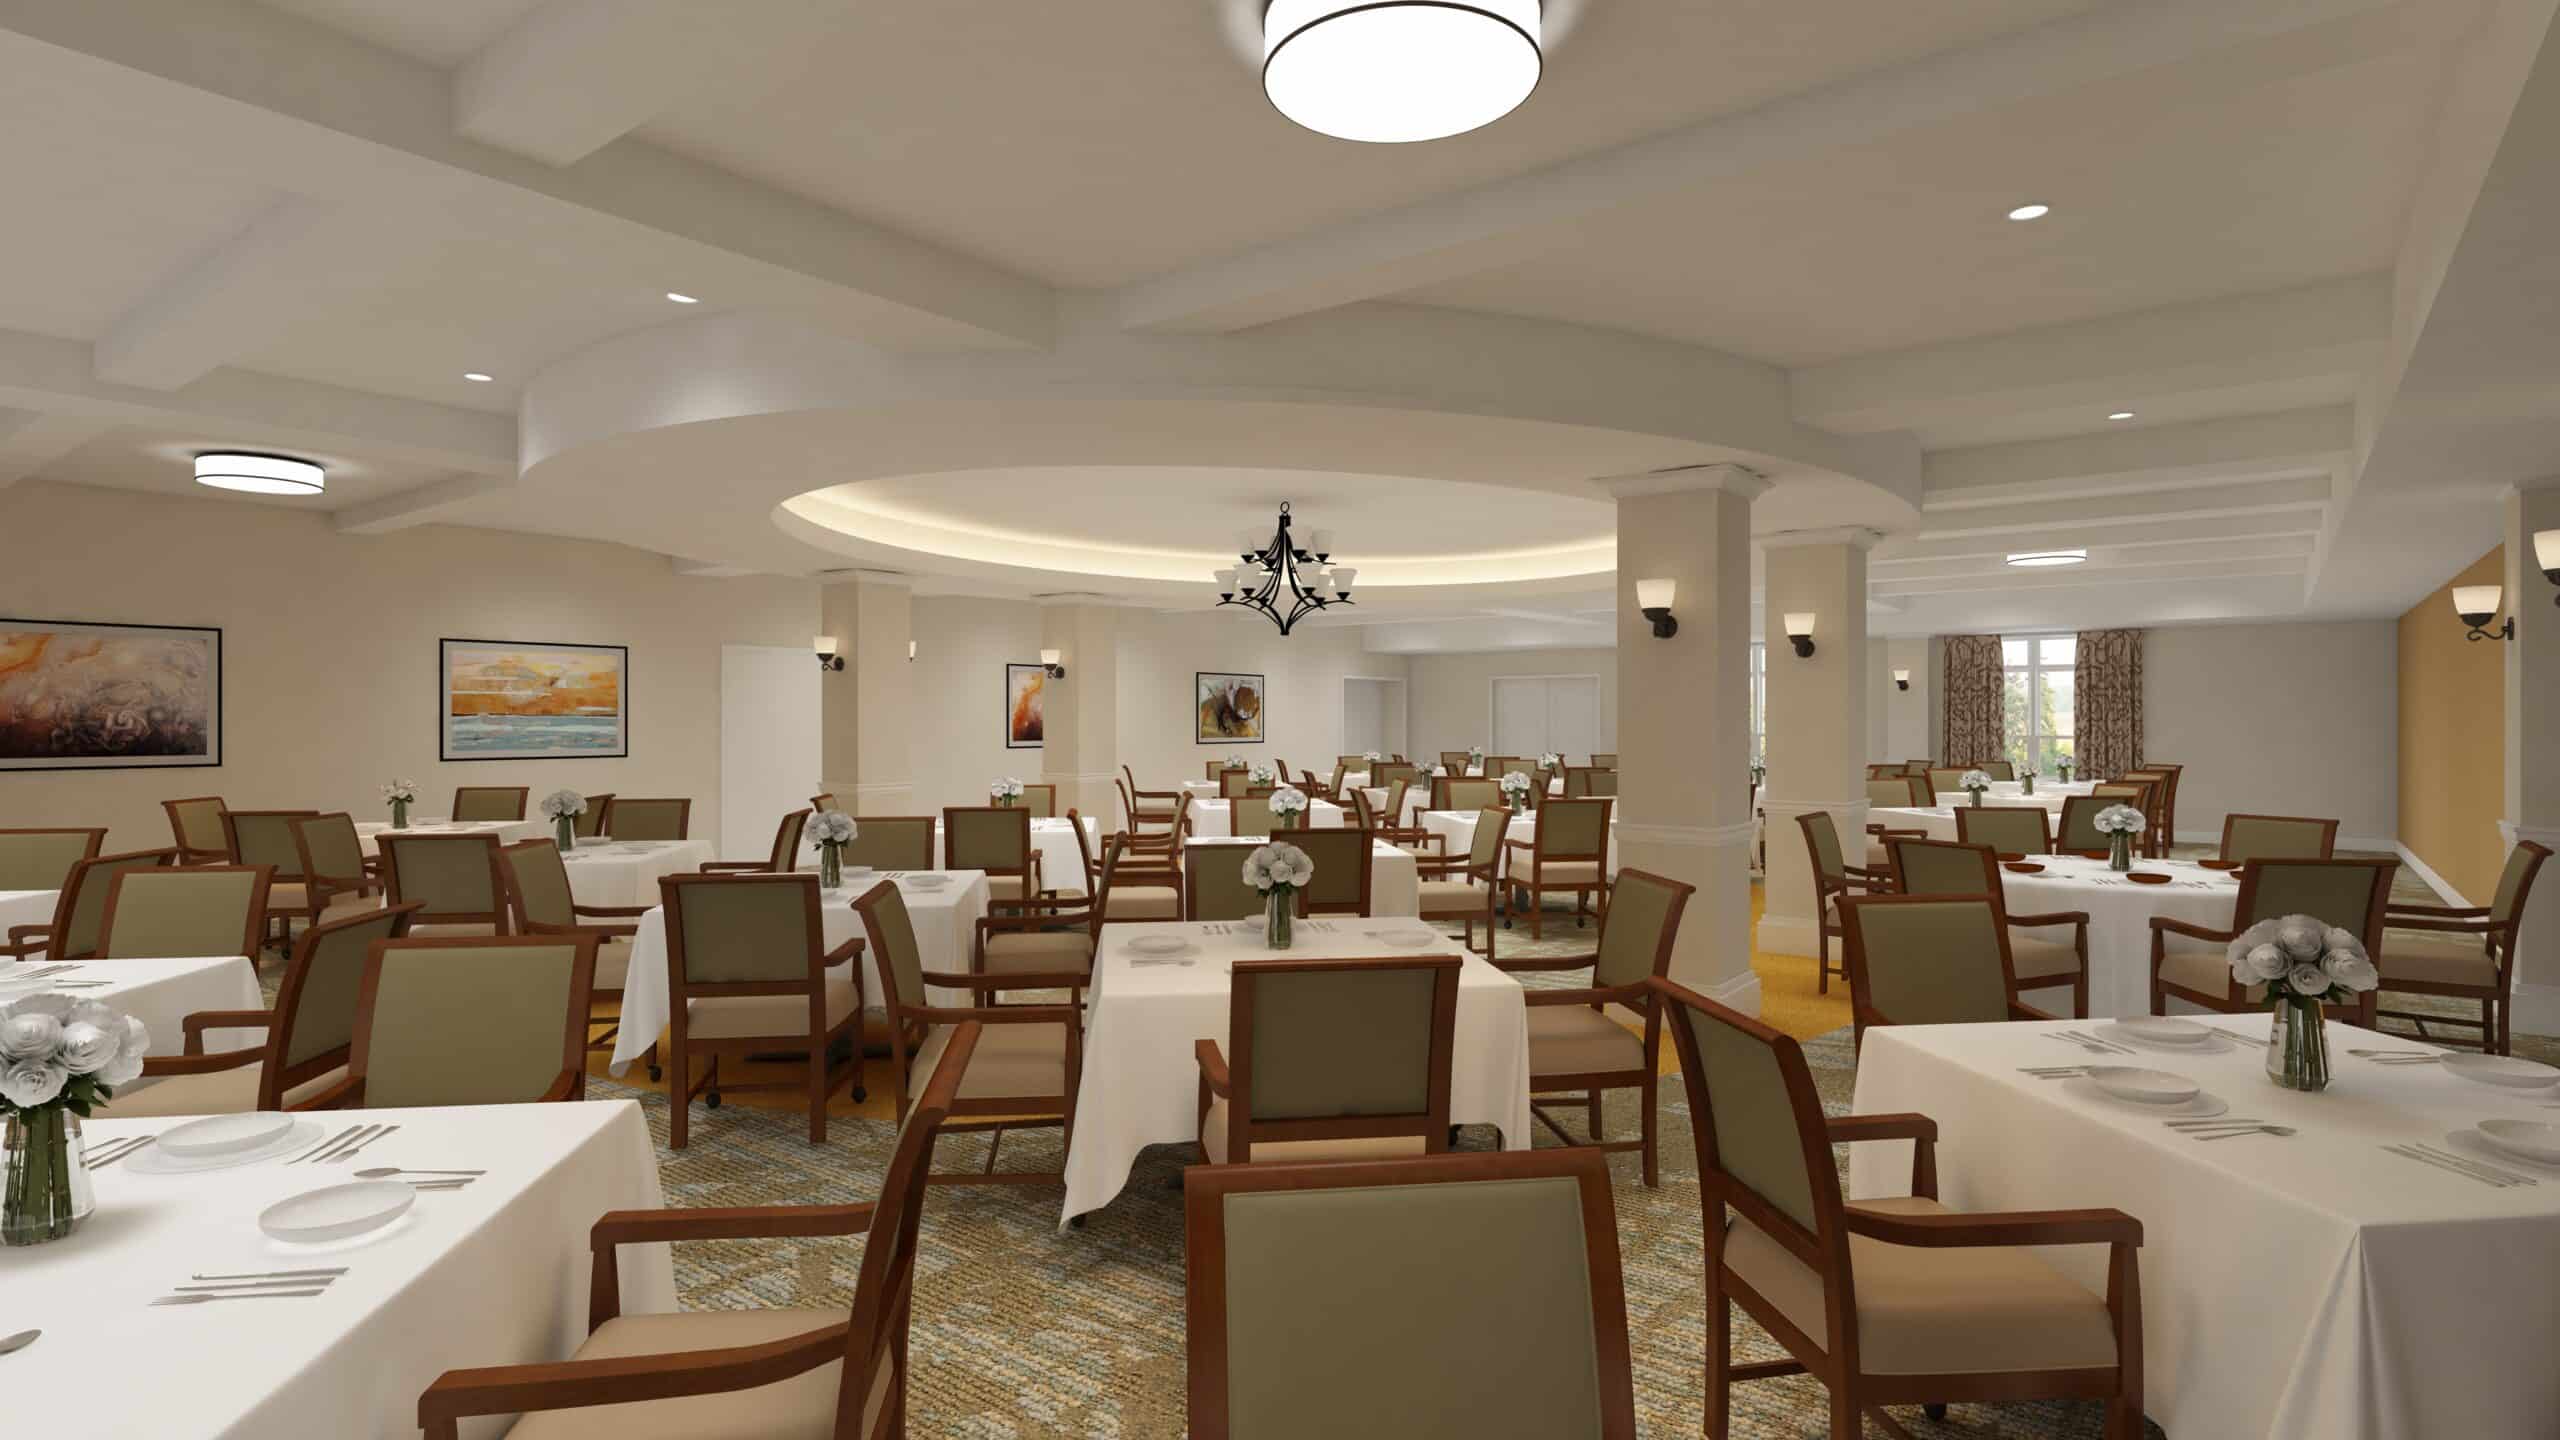 A rendering of a dining room with tables and chairs.